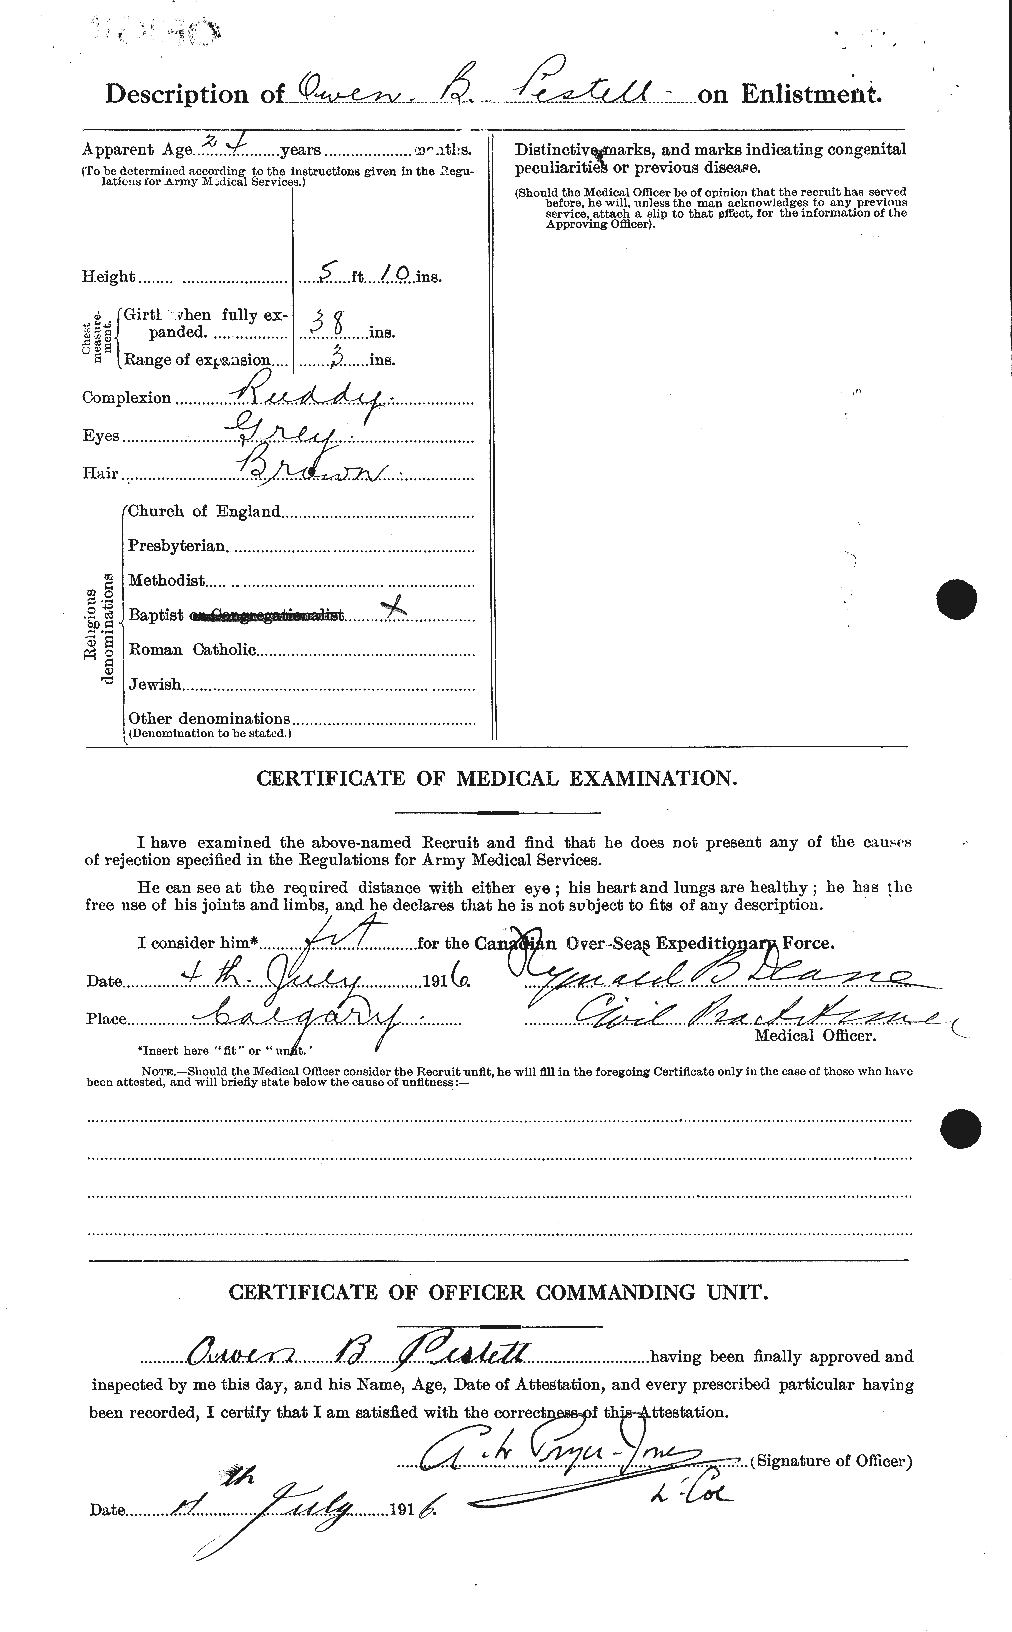 Personnel Records of the First World War - CEF 575239b